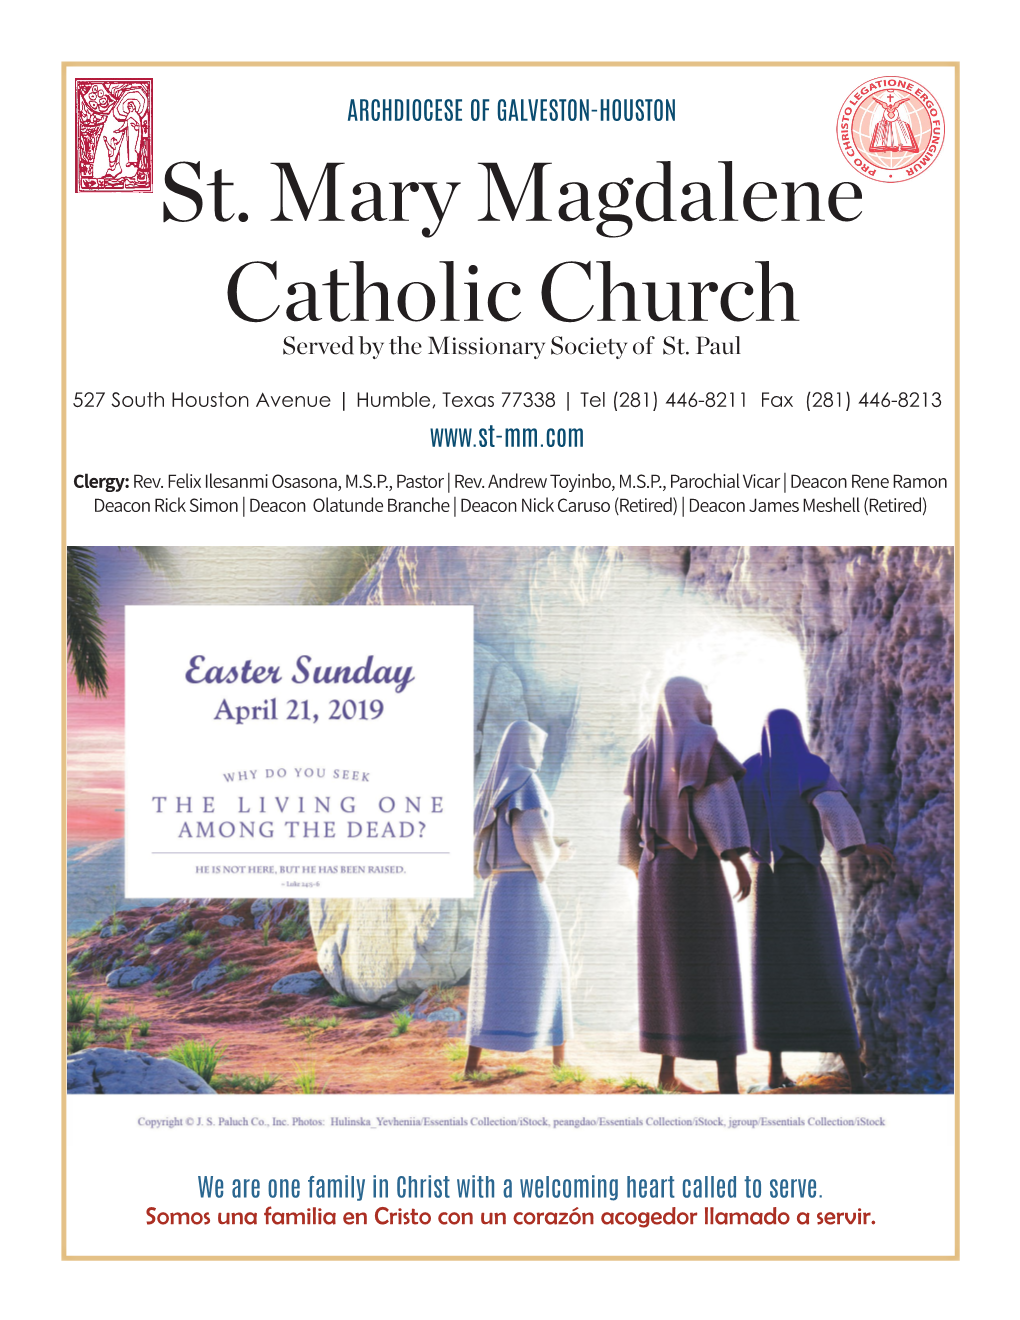 St. Mary Magdalene Catholic Church Served by the Missionary Society of St